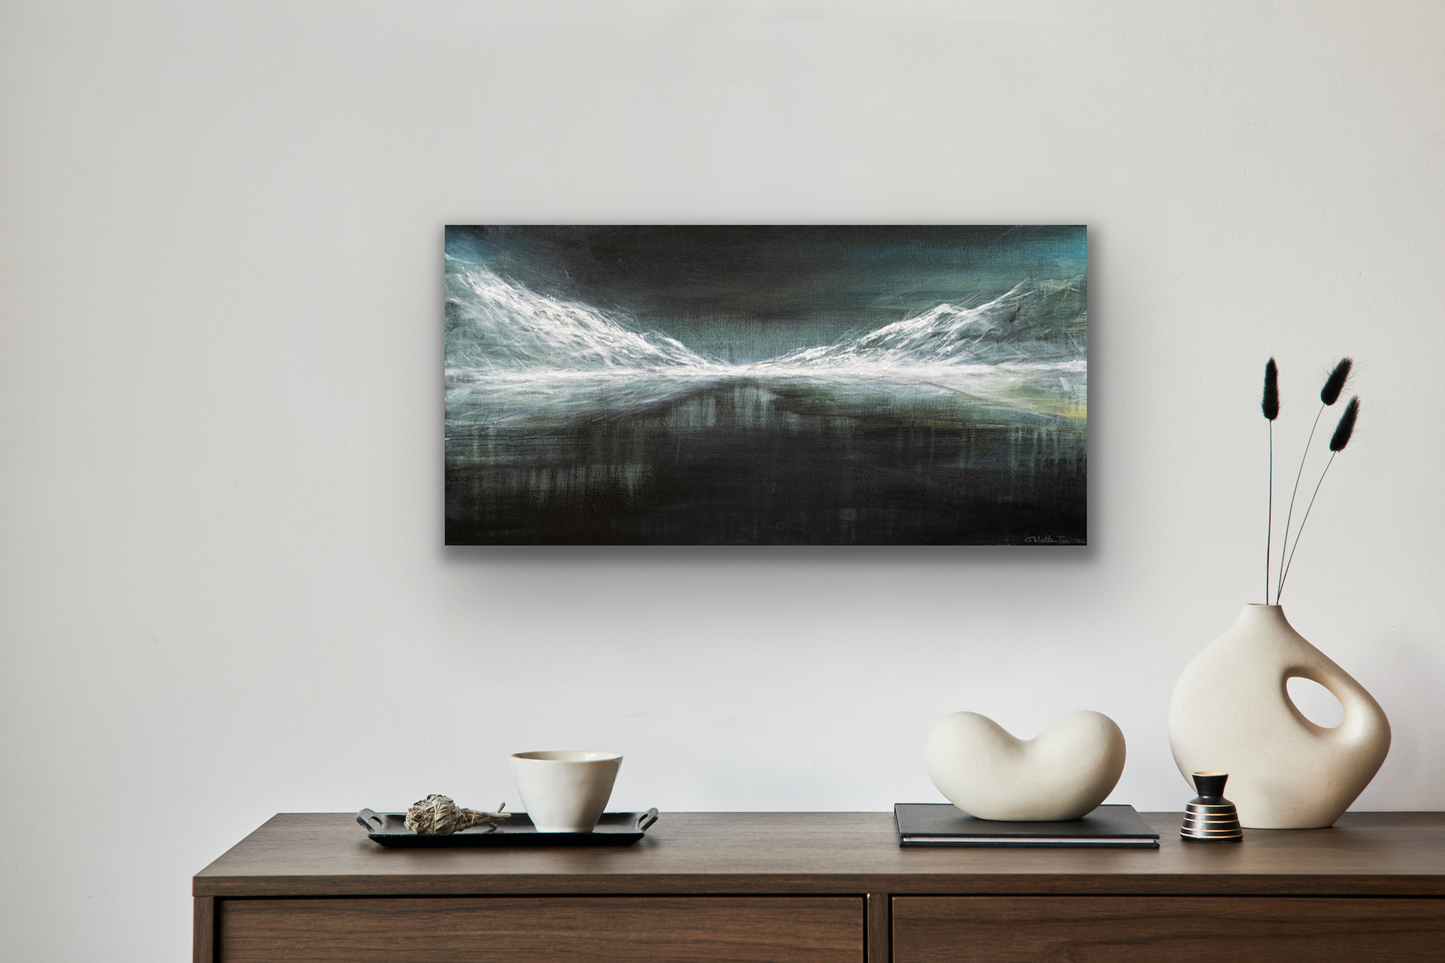 Edith abstract landscape wall art would look  great in your living room, dining room or hallway.  